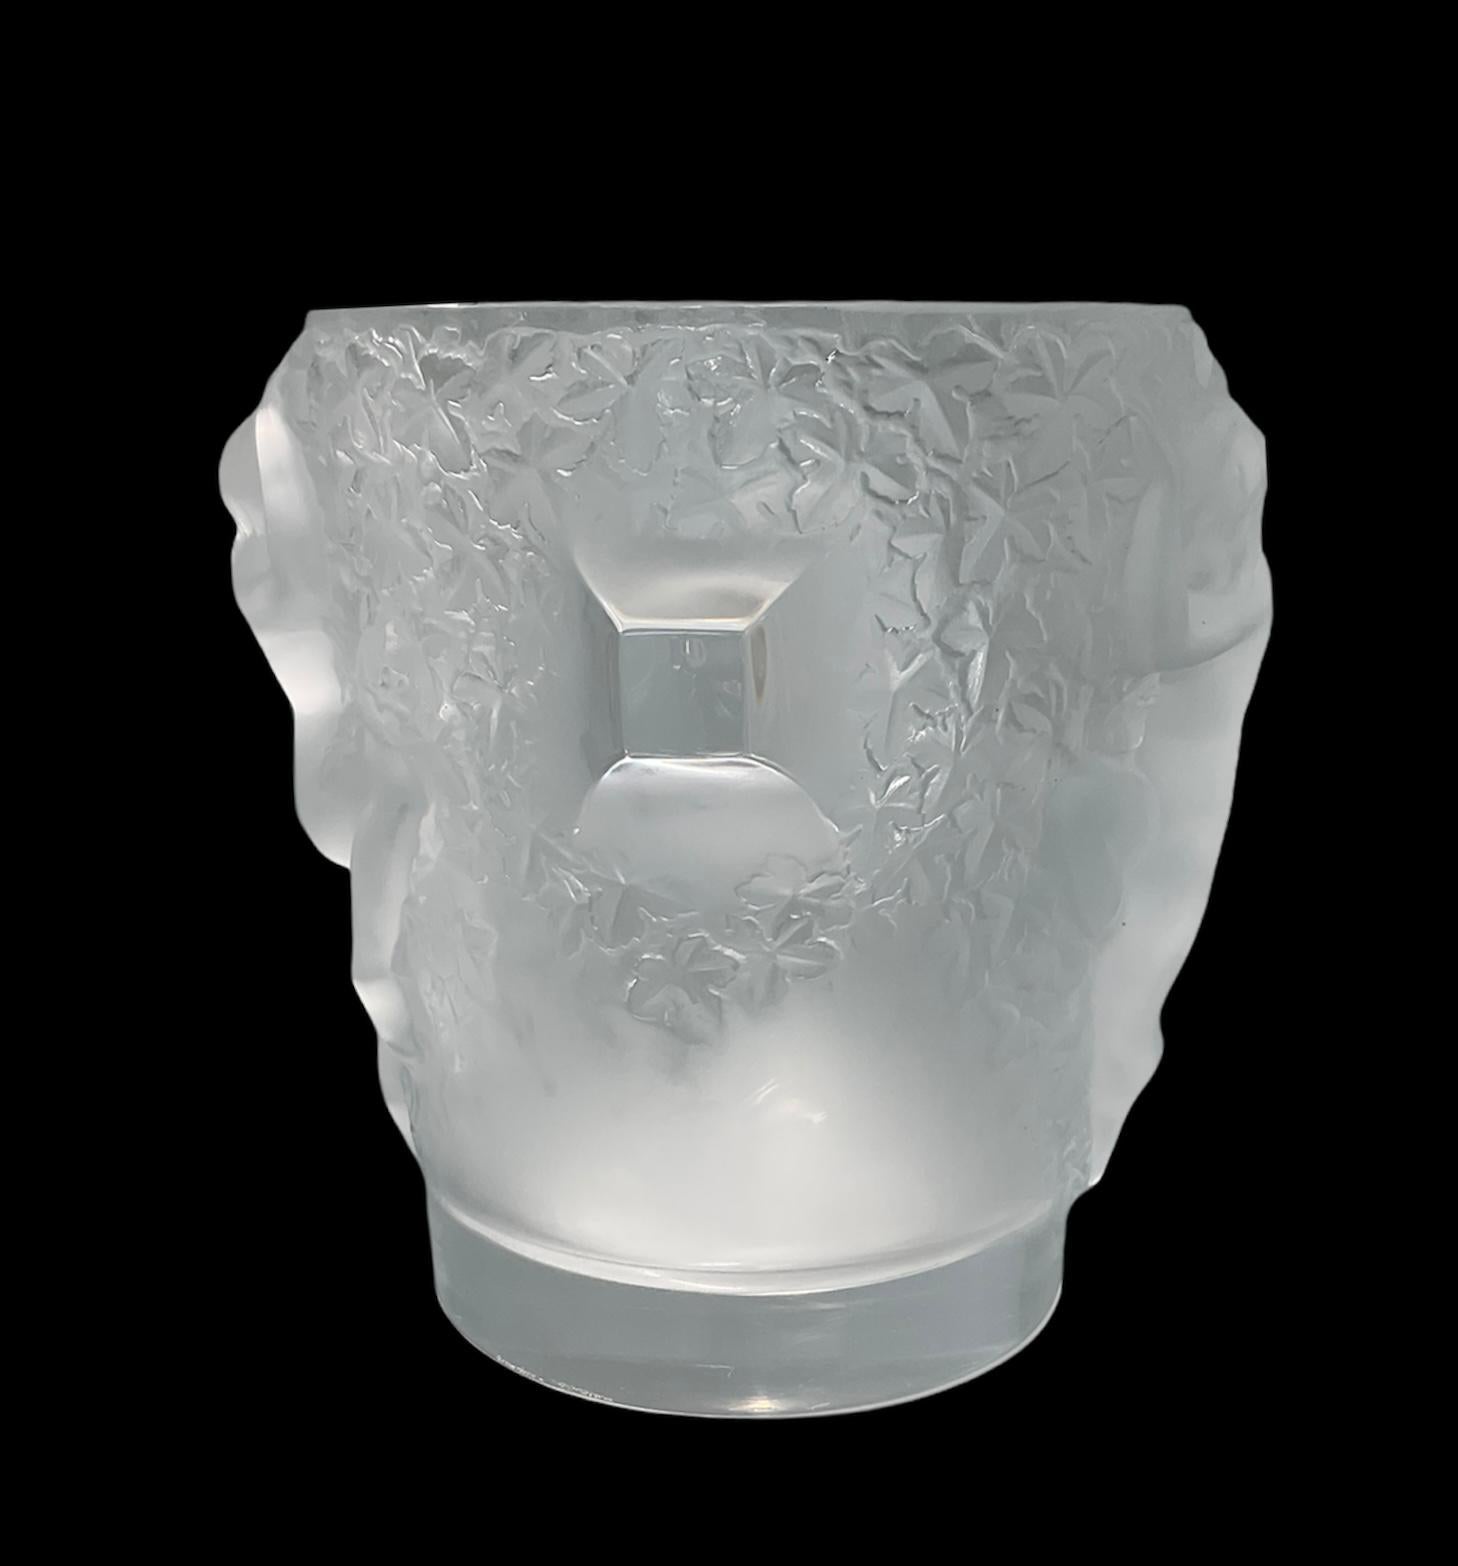 This is a Lalique crystal Ganymede champagne cooler/ice bucket. It is a wide, heavy and cylindrical shaped clear and frosted crystal container. It is decorated by bas-reliefs of nude dancers in a background of grapes leaves. In Greek and Roman